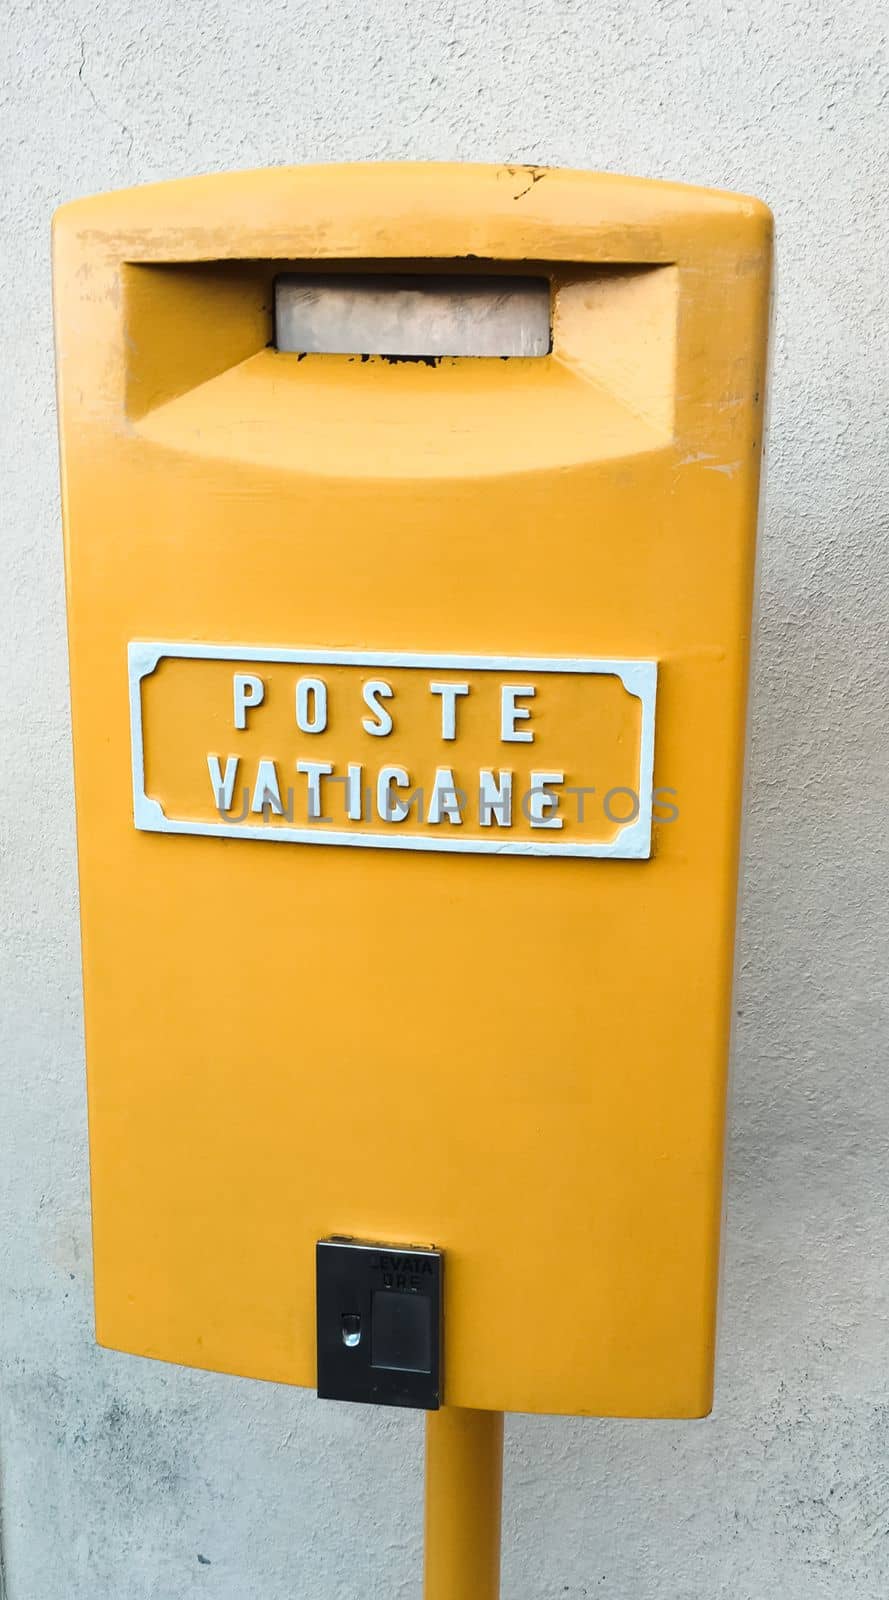 Post box in vatican city rome italy by WeWander